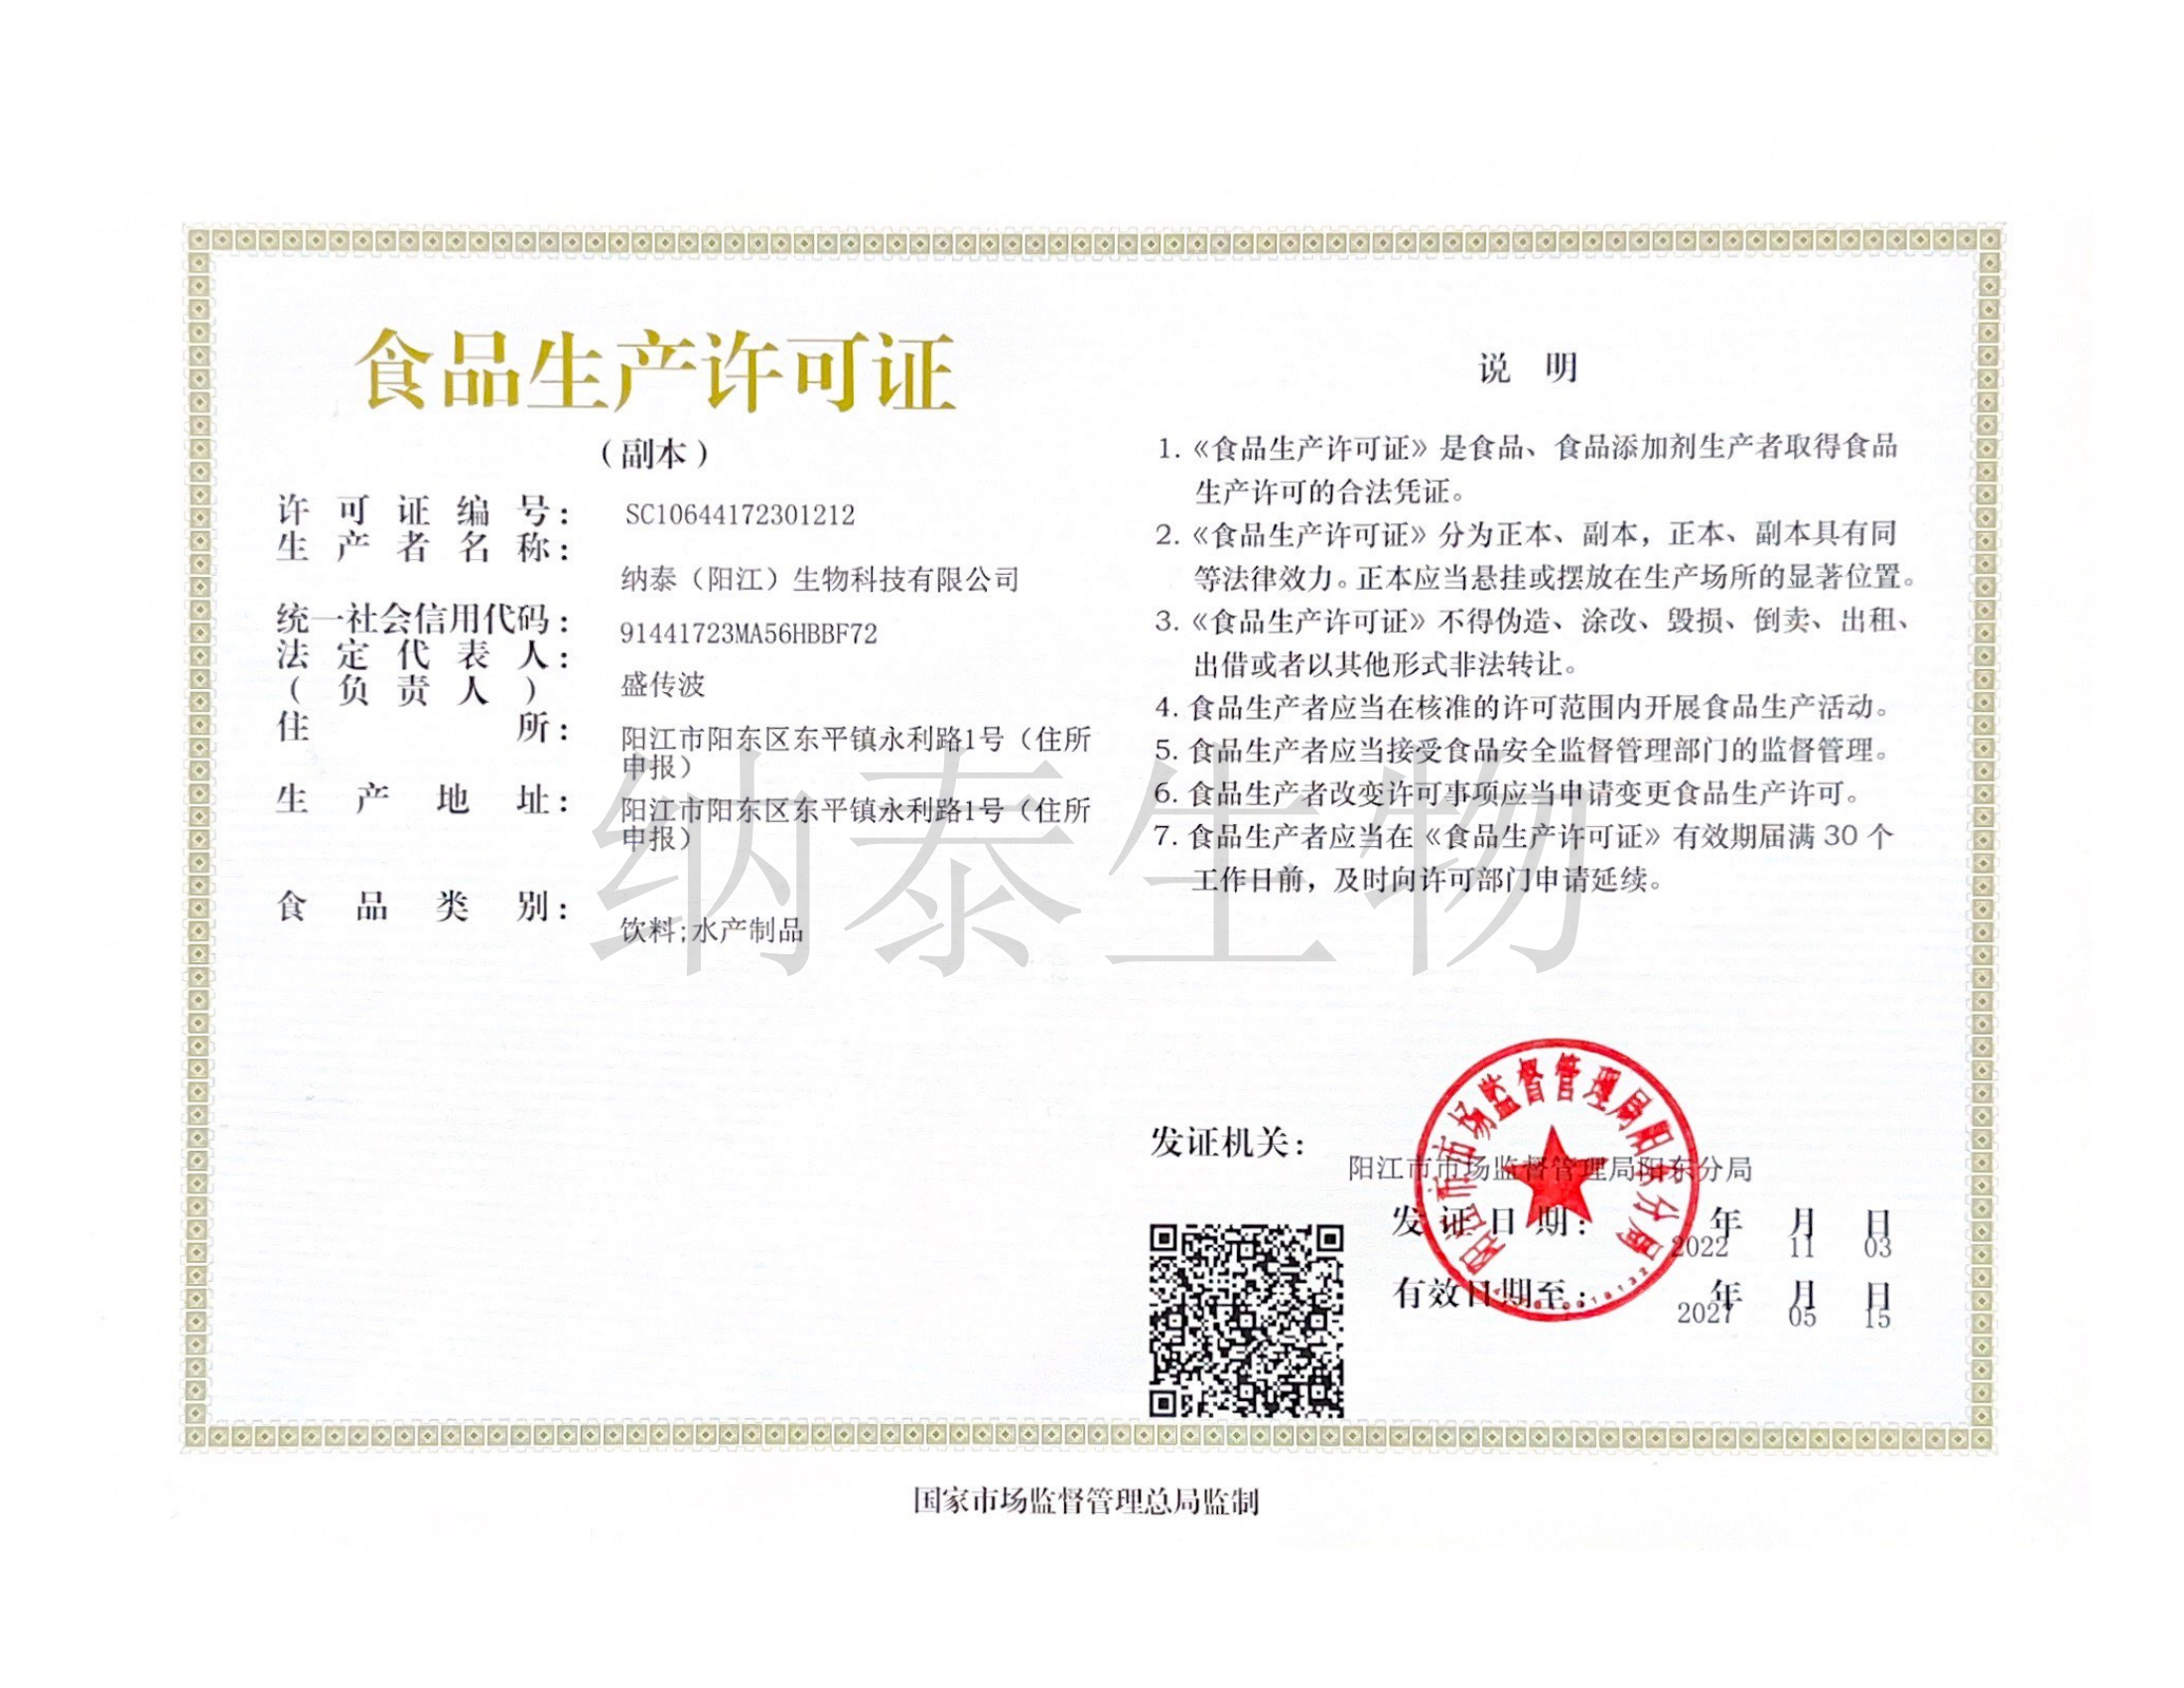 Food production license